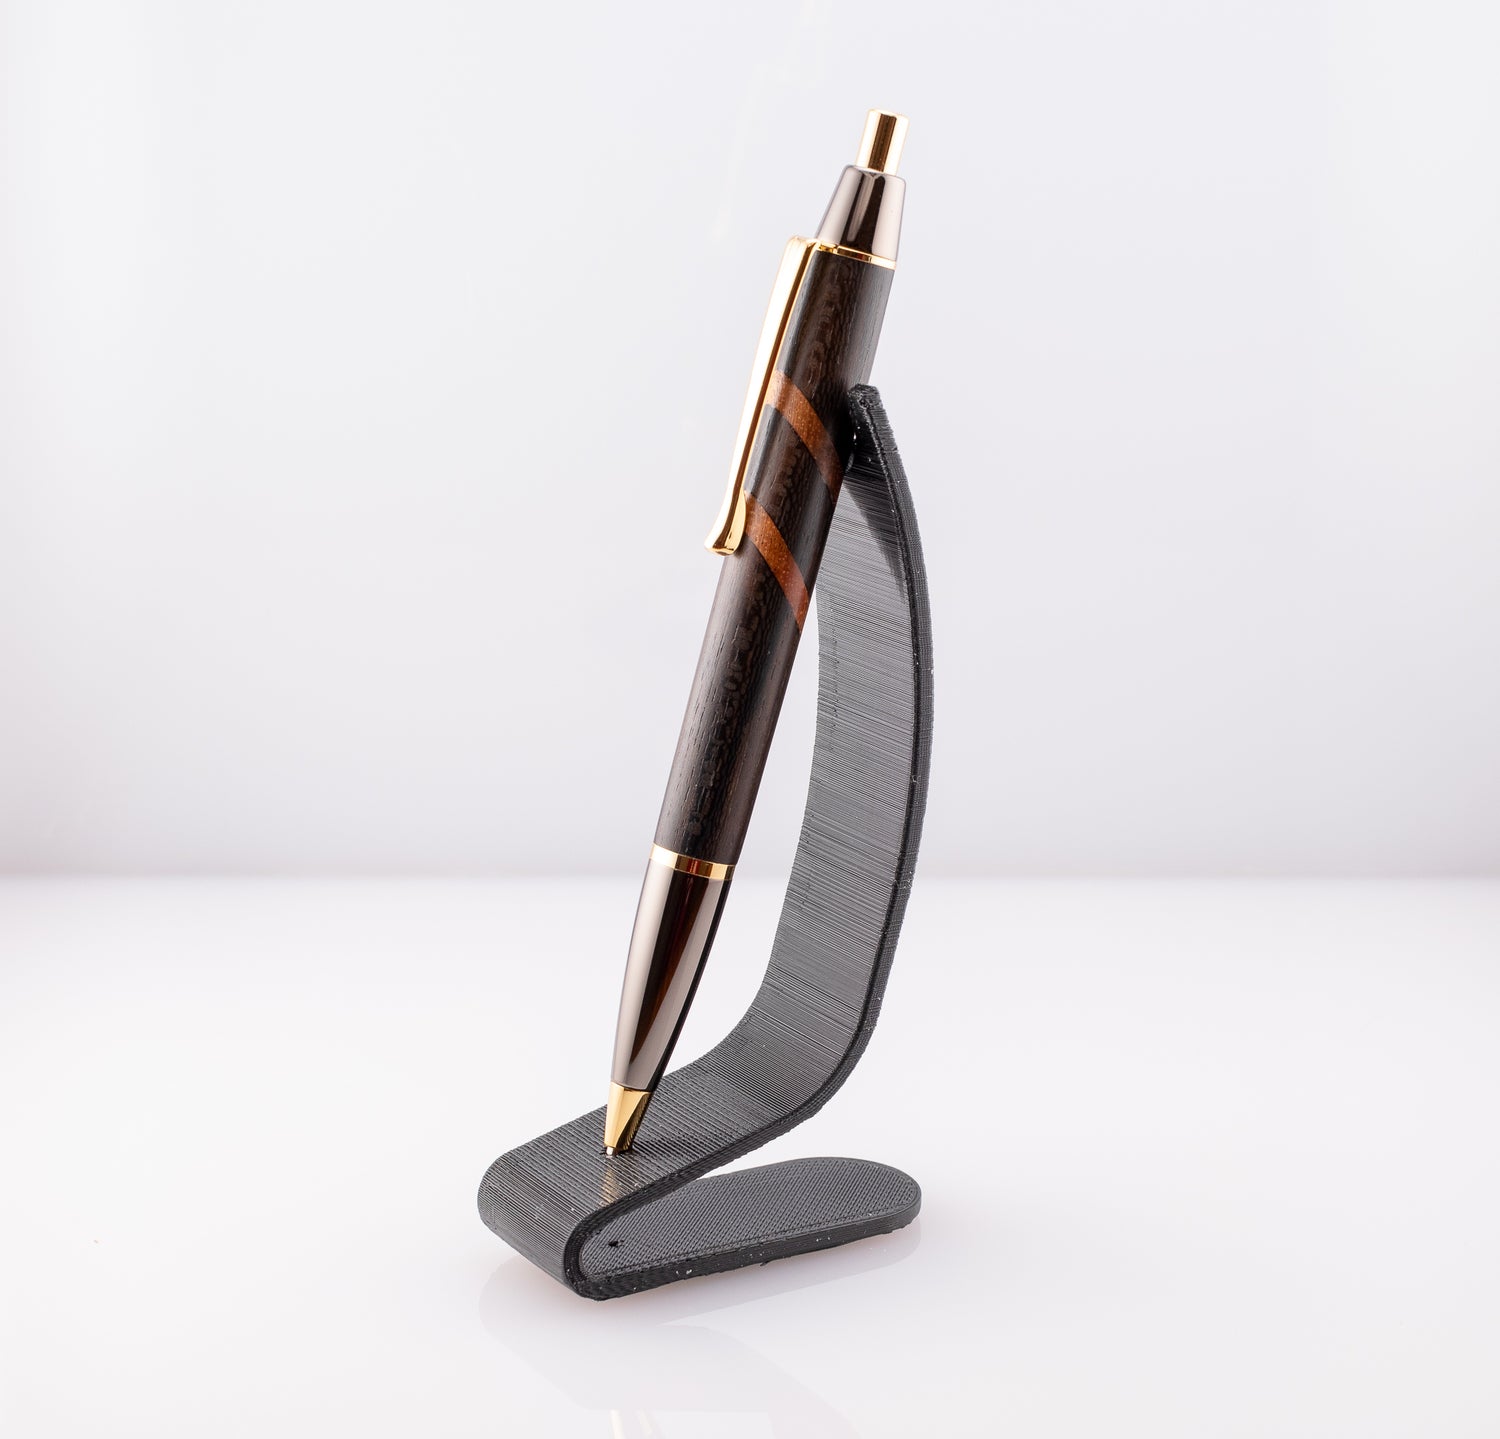 A handmade ziricote and african mahogany wood pen with gold and gun metal plating on a black stand